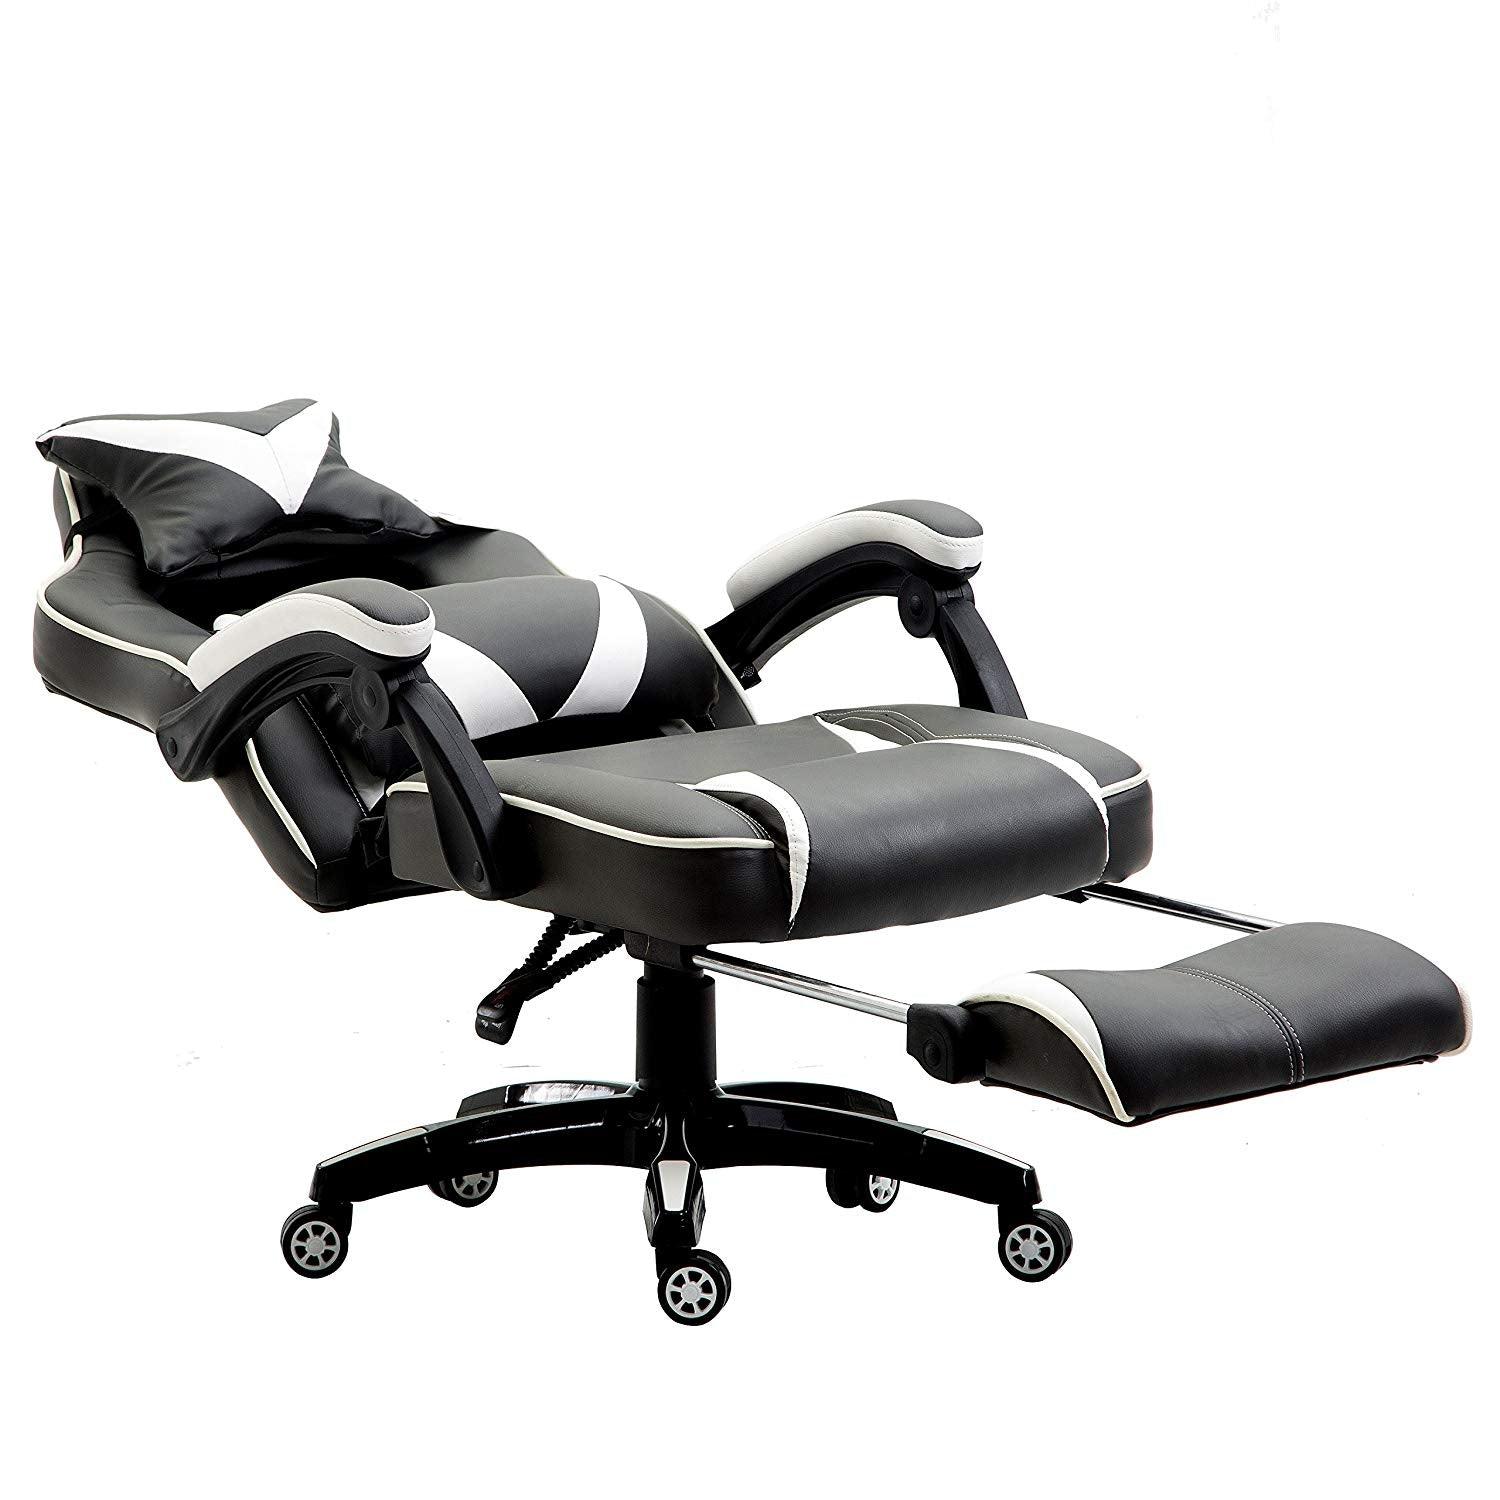 High Back Recliner Gaming Swivel Chair with Footrest & Adjustable Lumbar & Head Cushion, MR49 Black & White